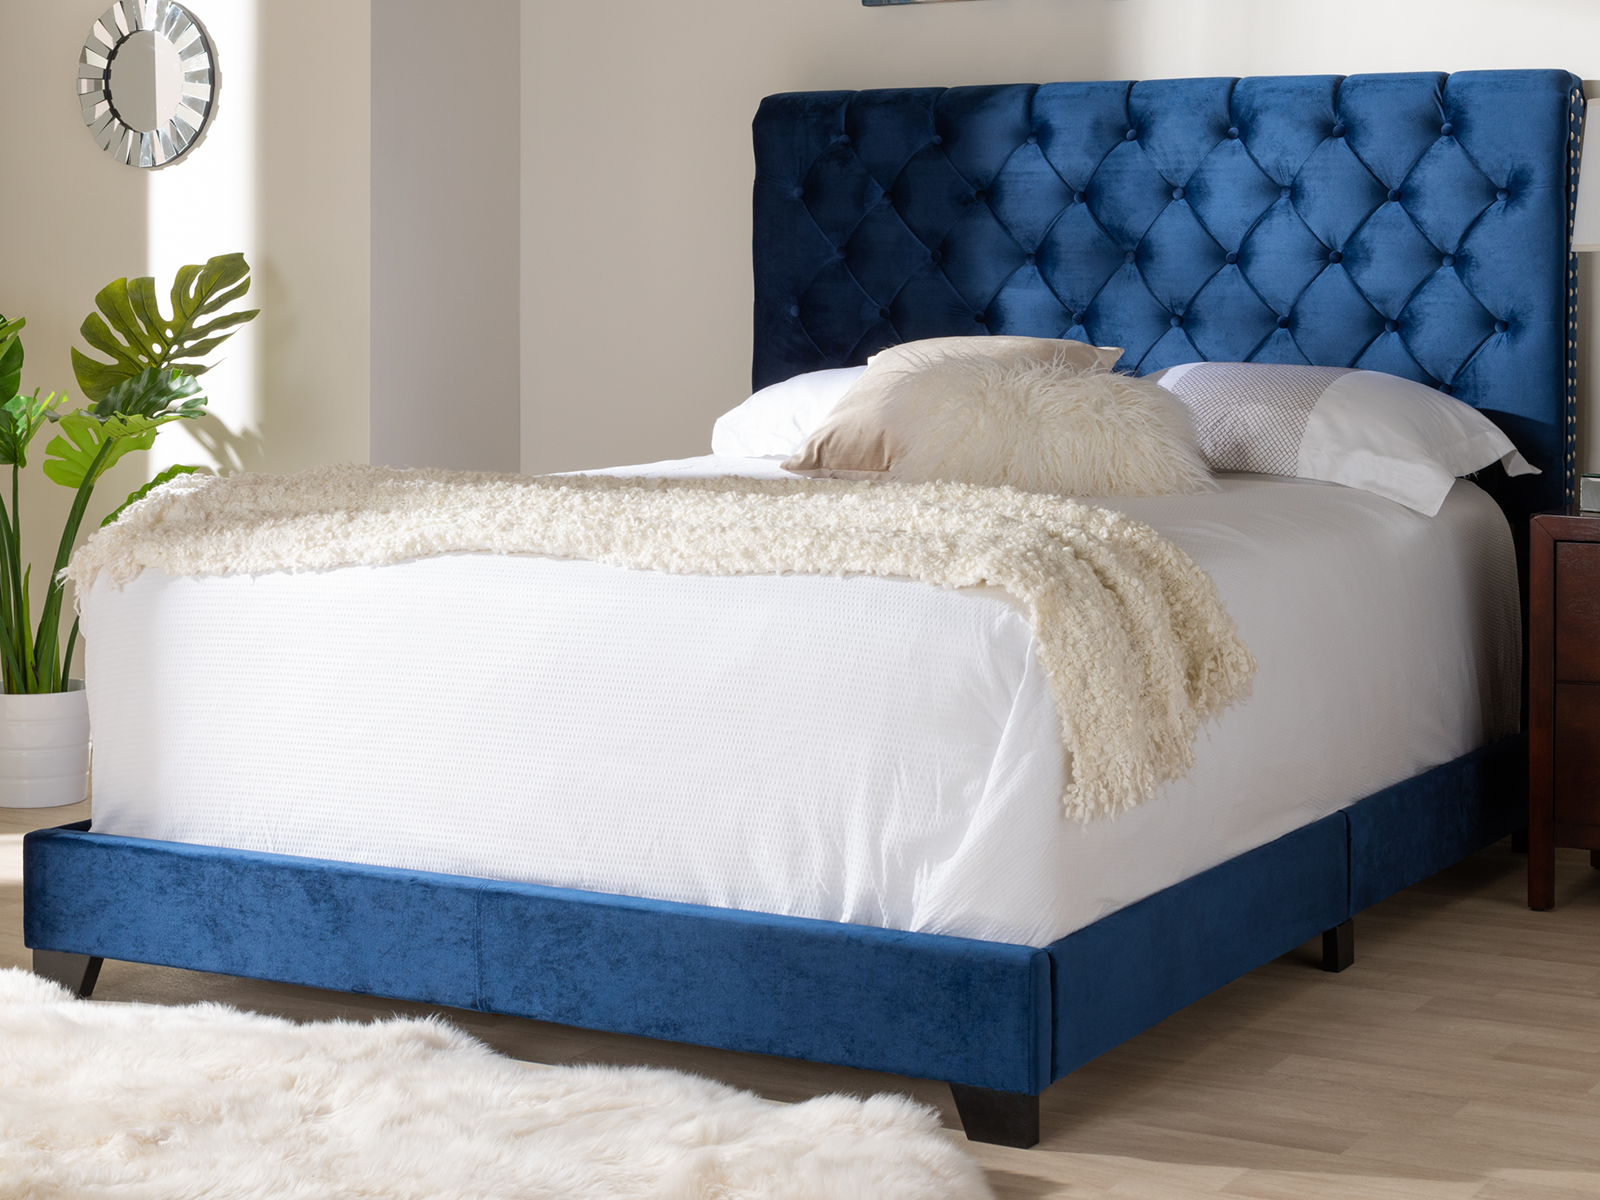 Baxton Studio Velvet Upholstered Bed | King | Candace Luxe & Glamour | Navy